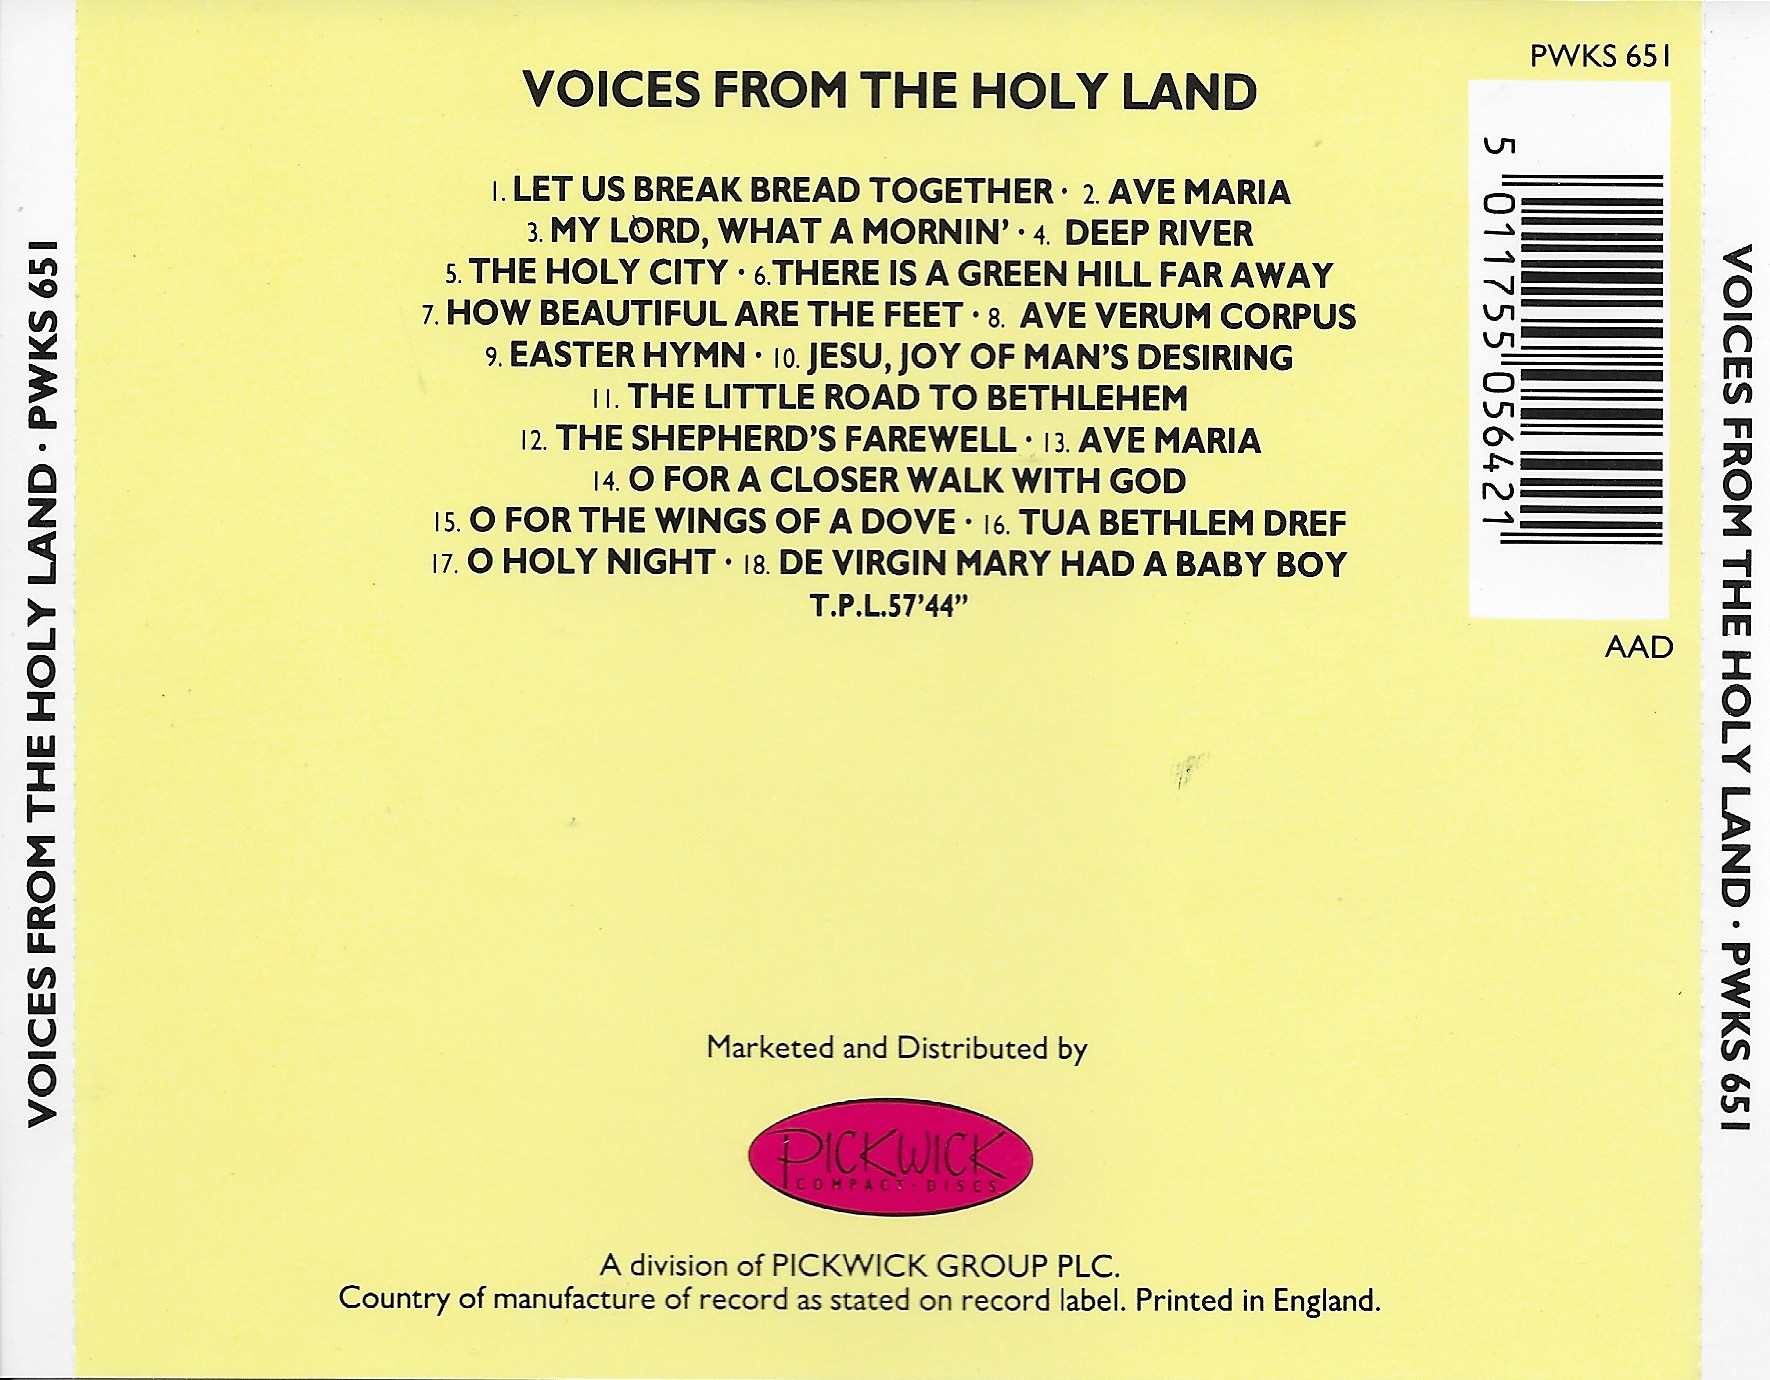 Picture of PWKS 651 Voices from the Holy Land by artist Various from the BBC records and Tapes library